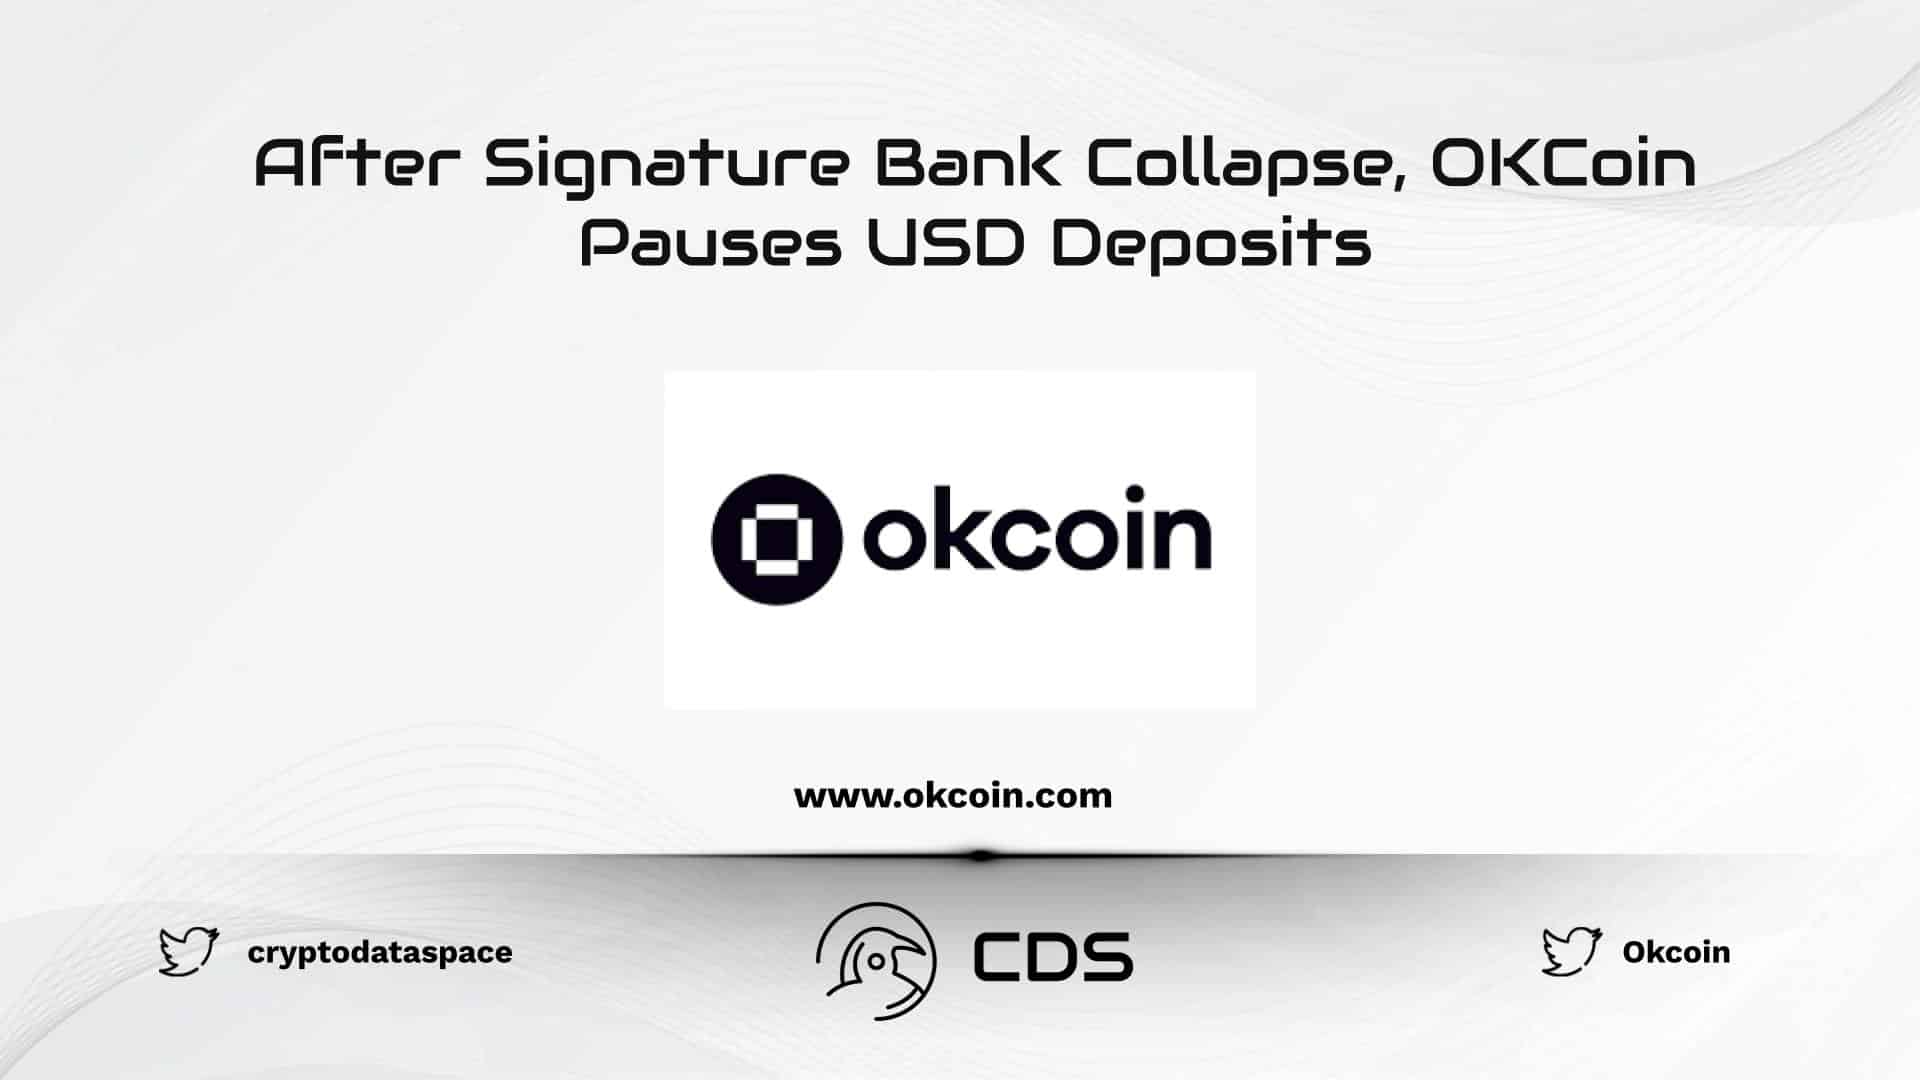 After Signature Bank Collapse, OKCoin Pauses USD Deposits